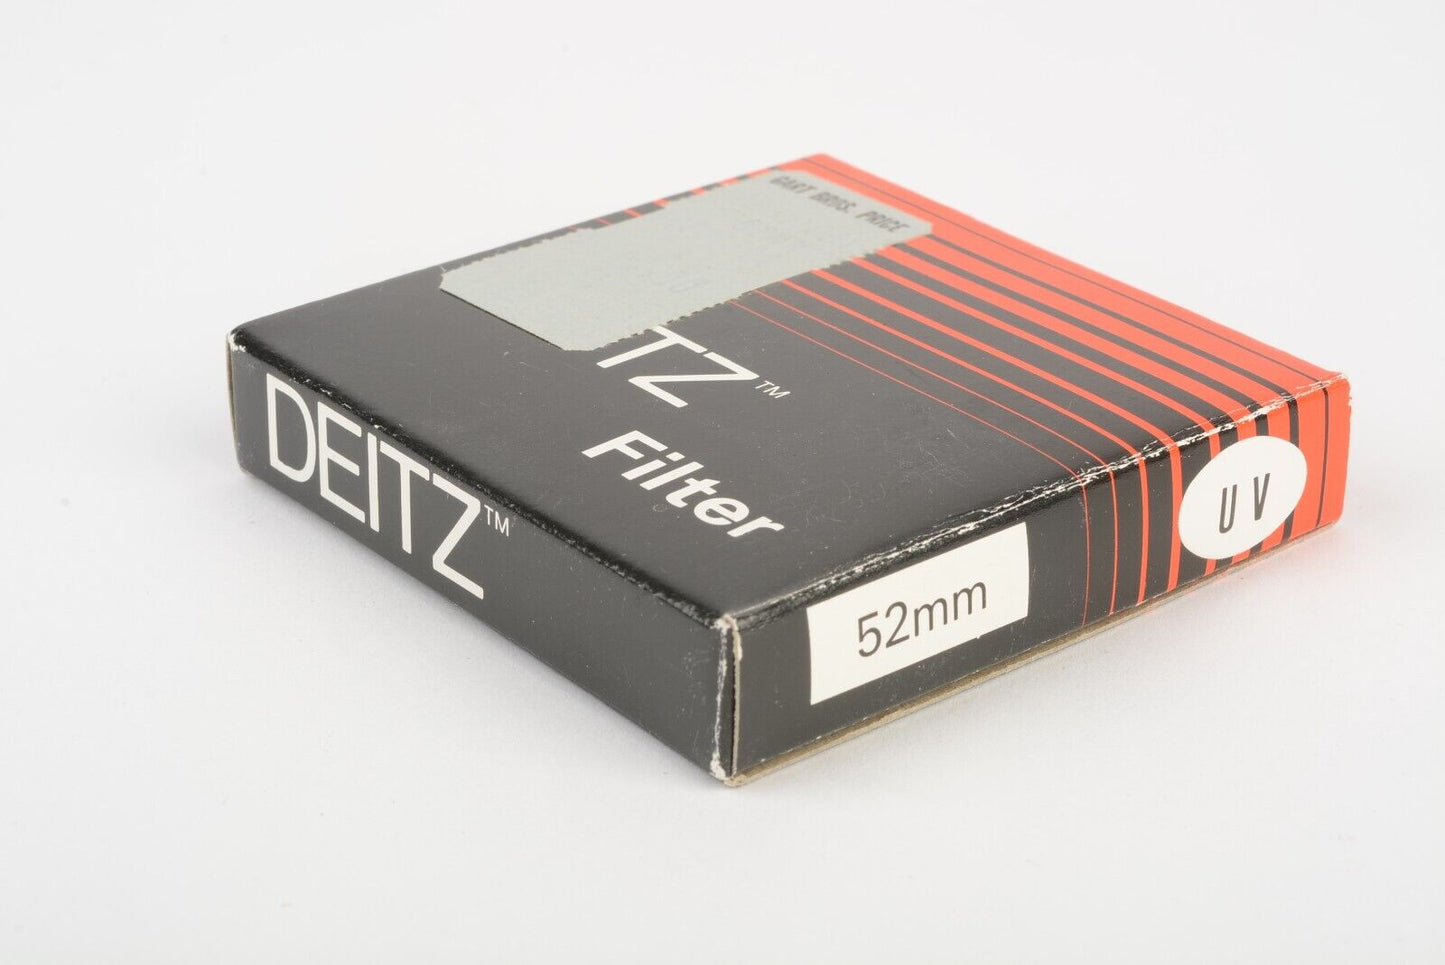 NEW BOXED DIETZ 52mm UV GLASS FILTER, IN JEWEL CASE, VERY CLEAN